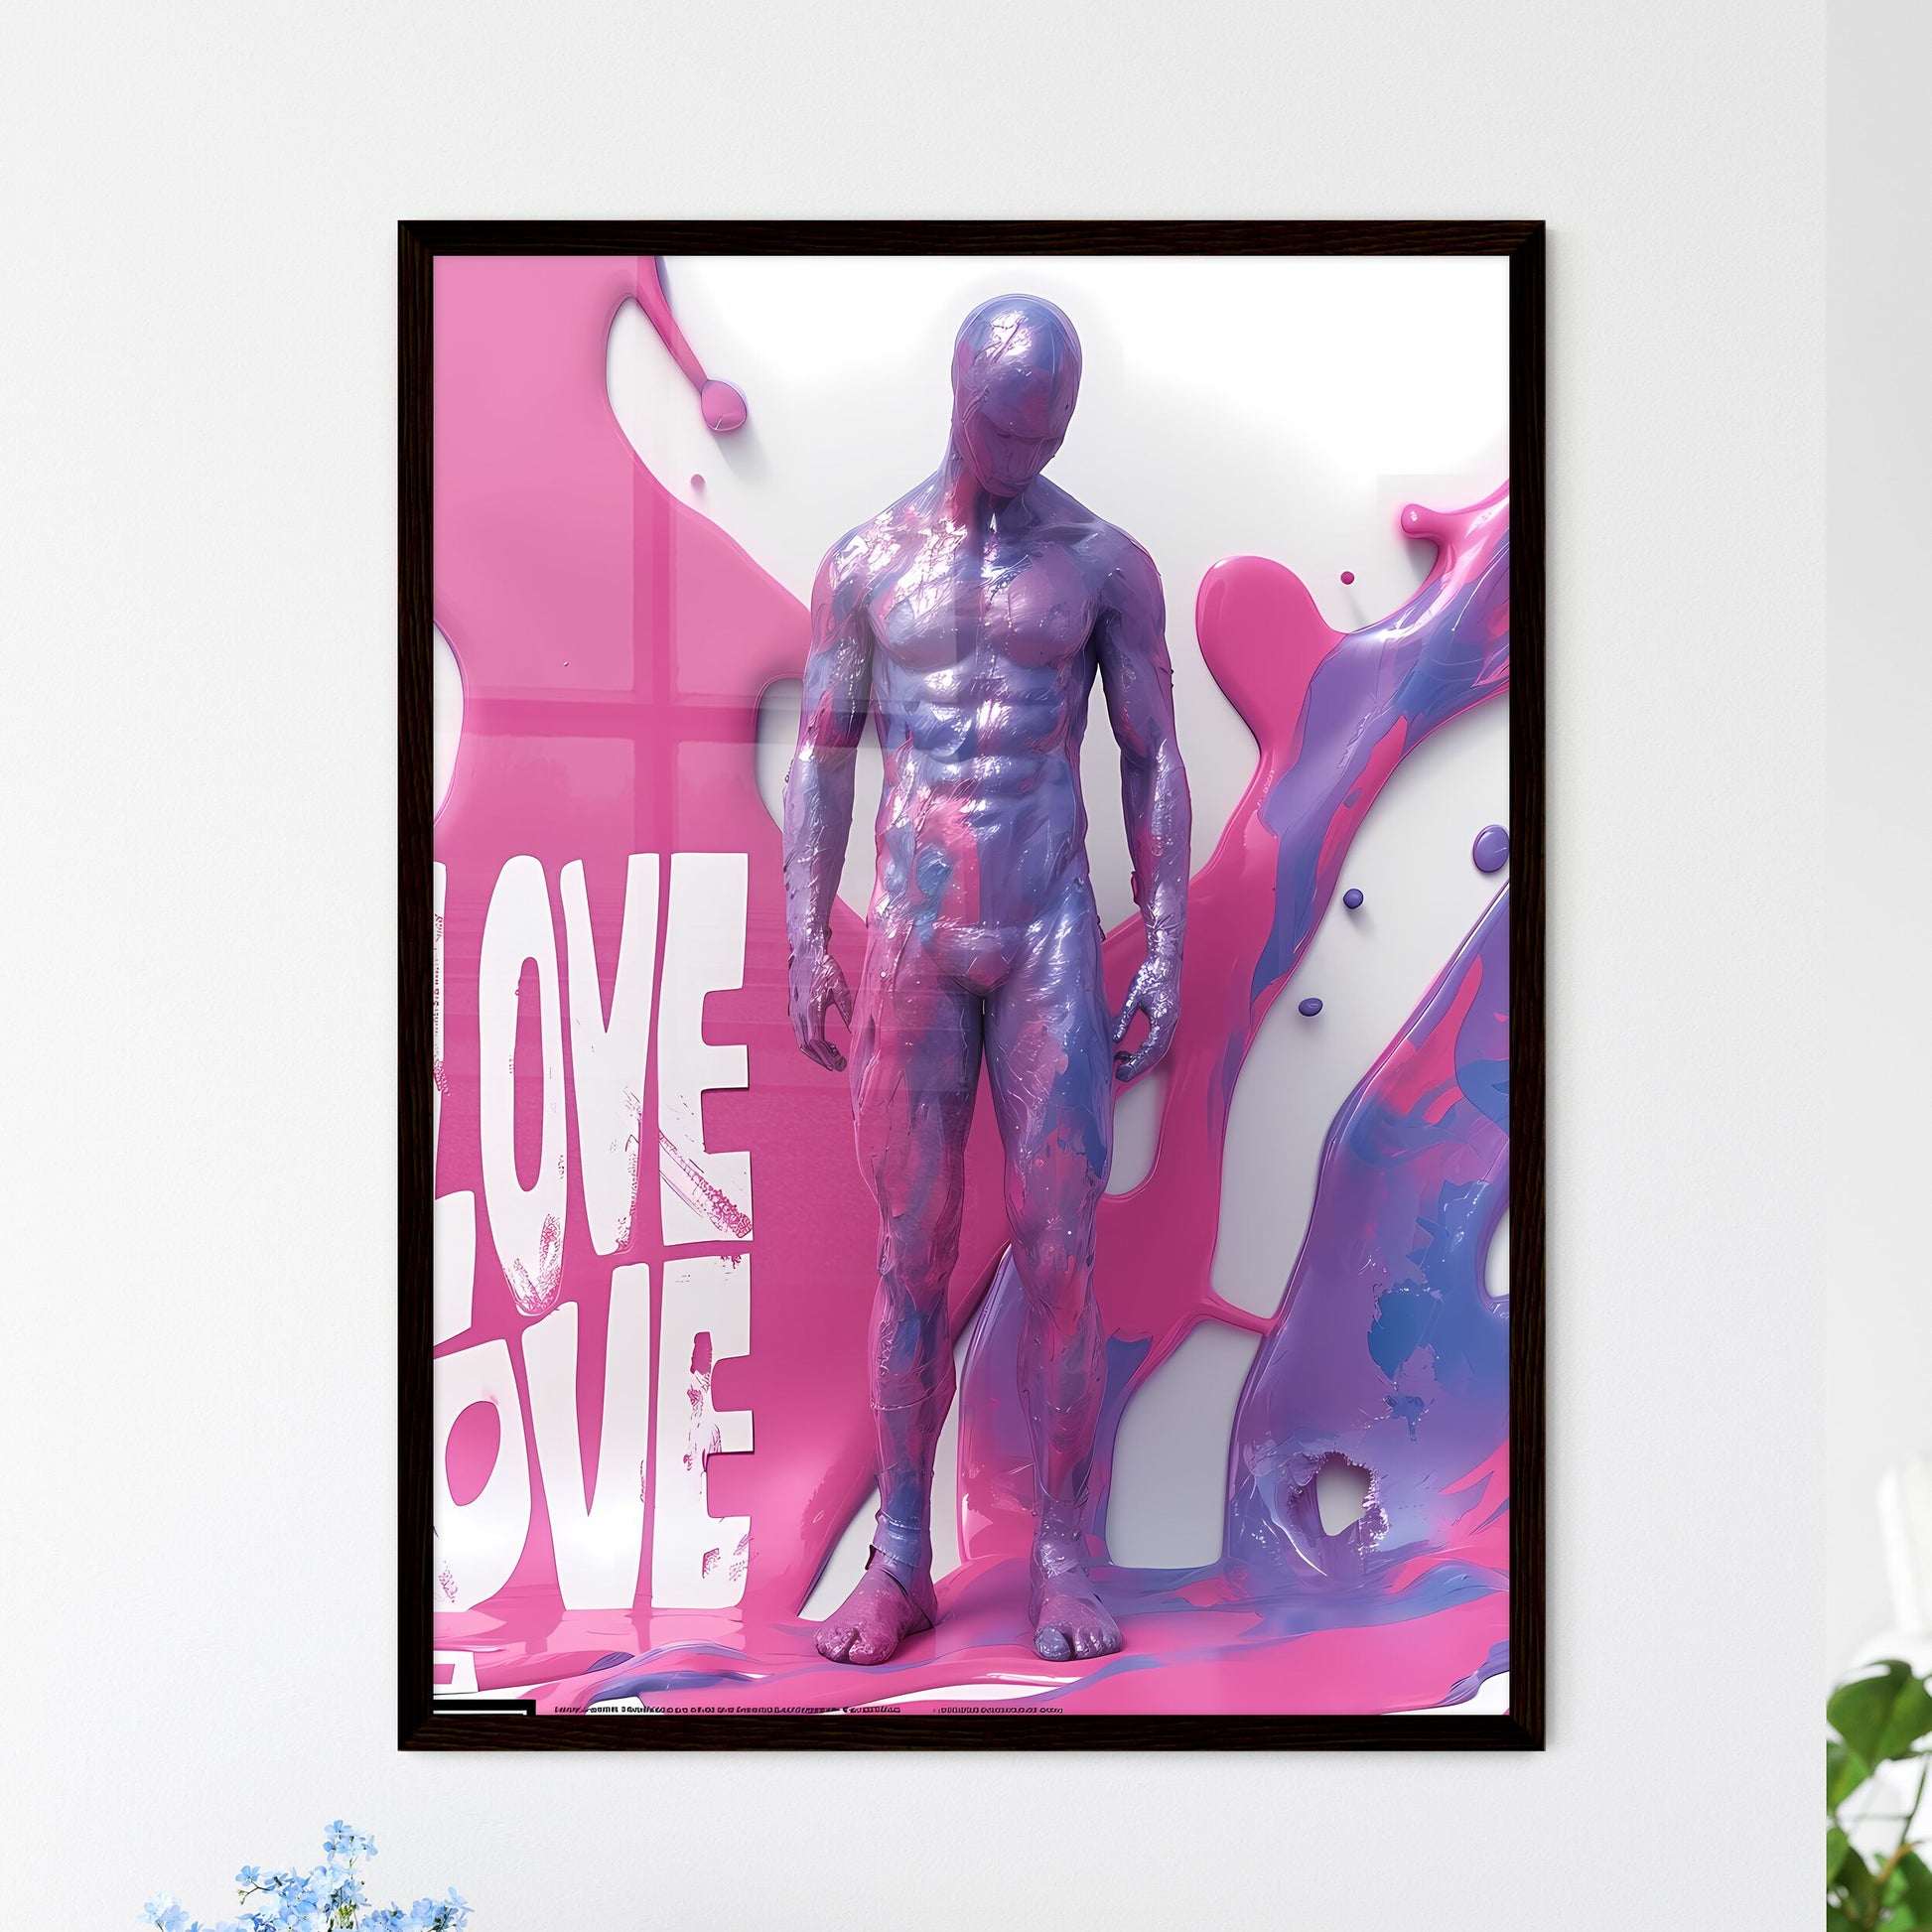 LOVE isolated - Art print of a statue of a man covered in paint Default Title